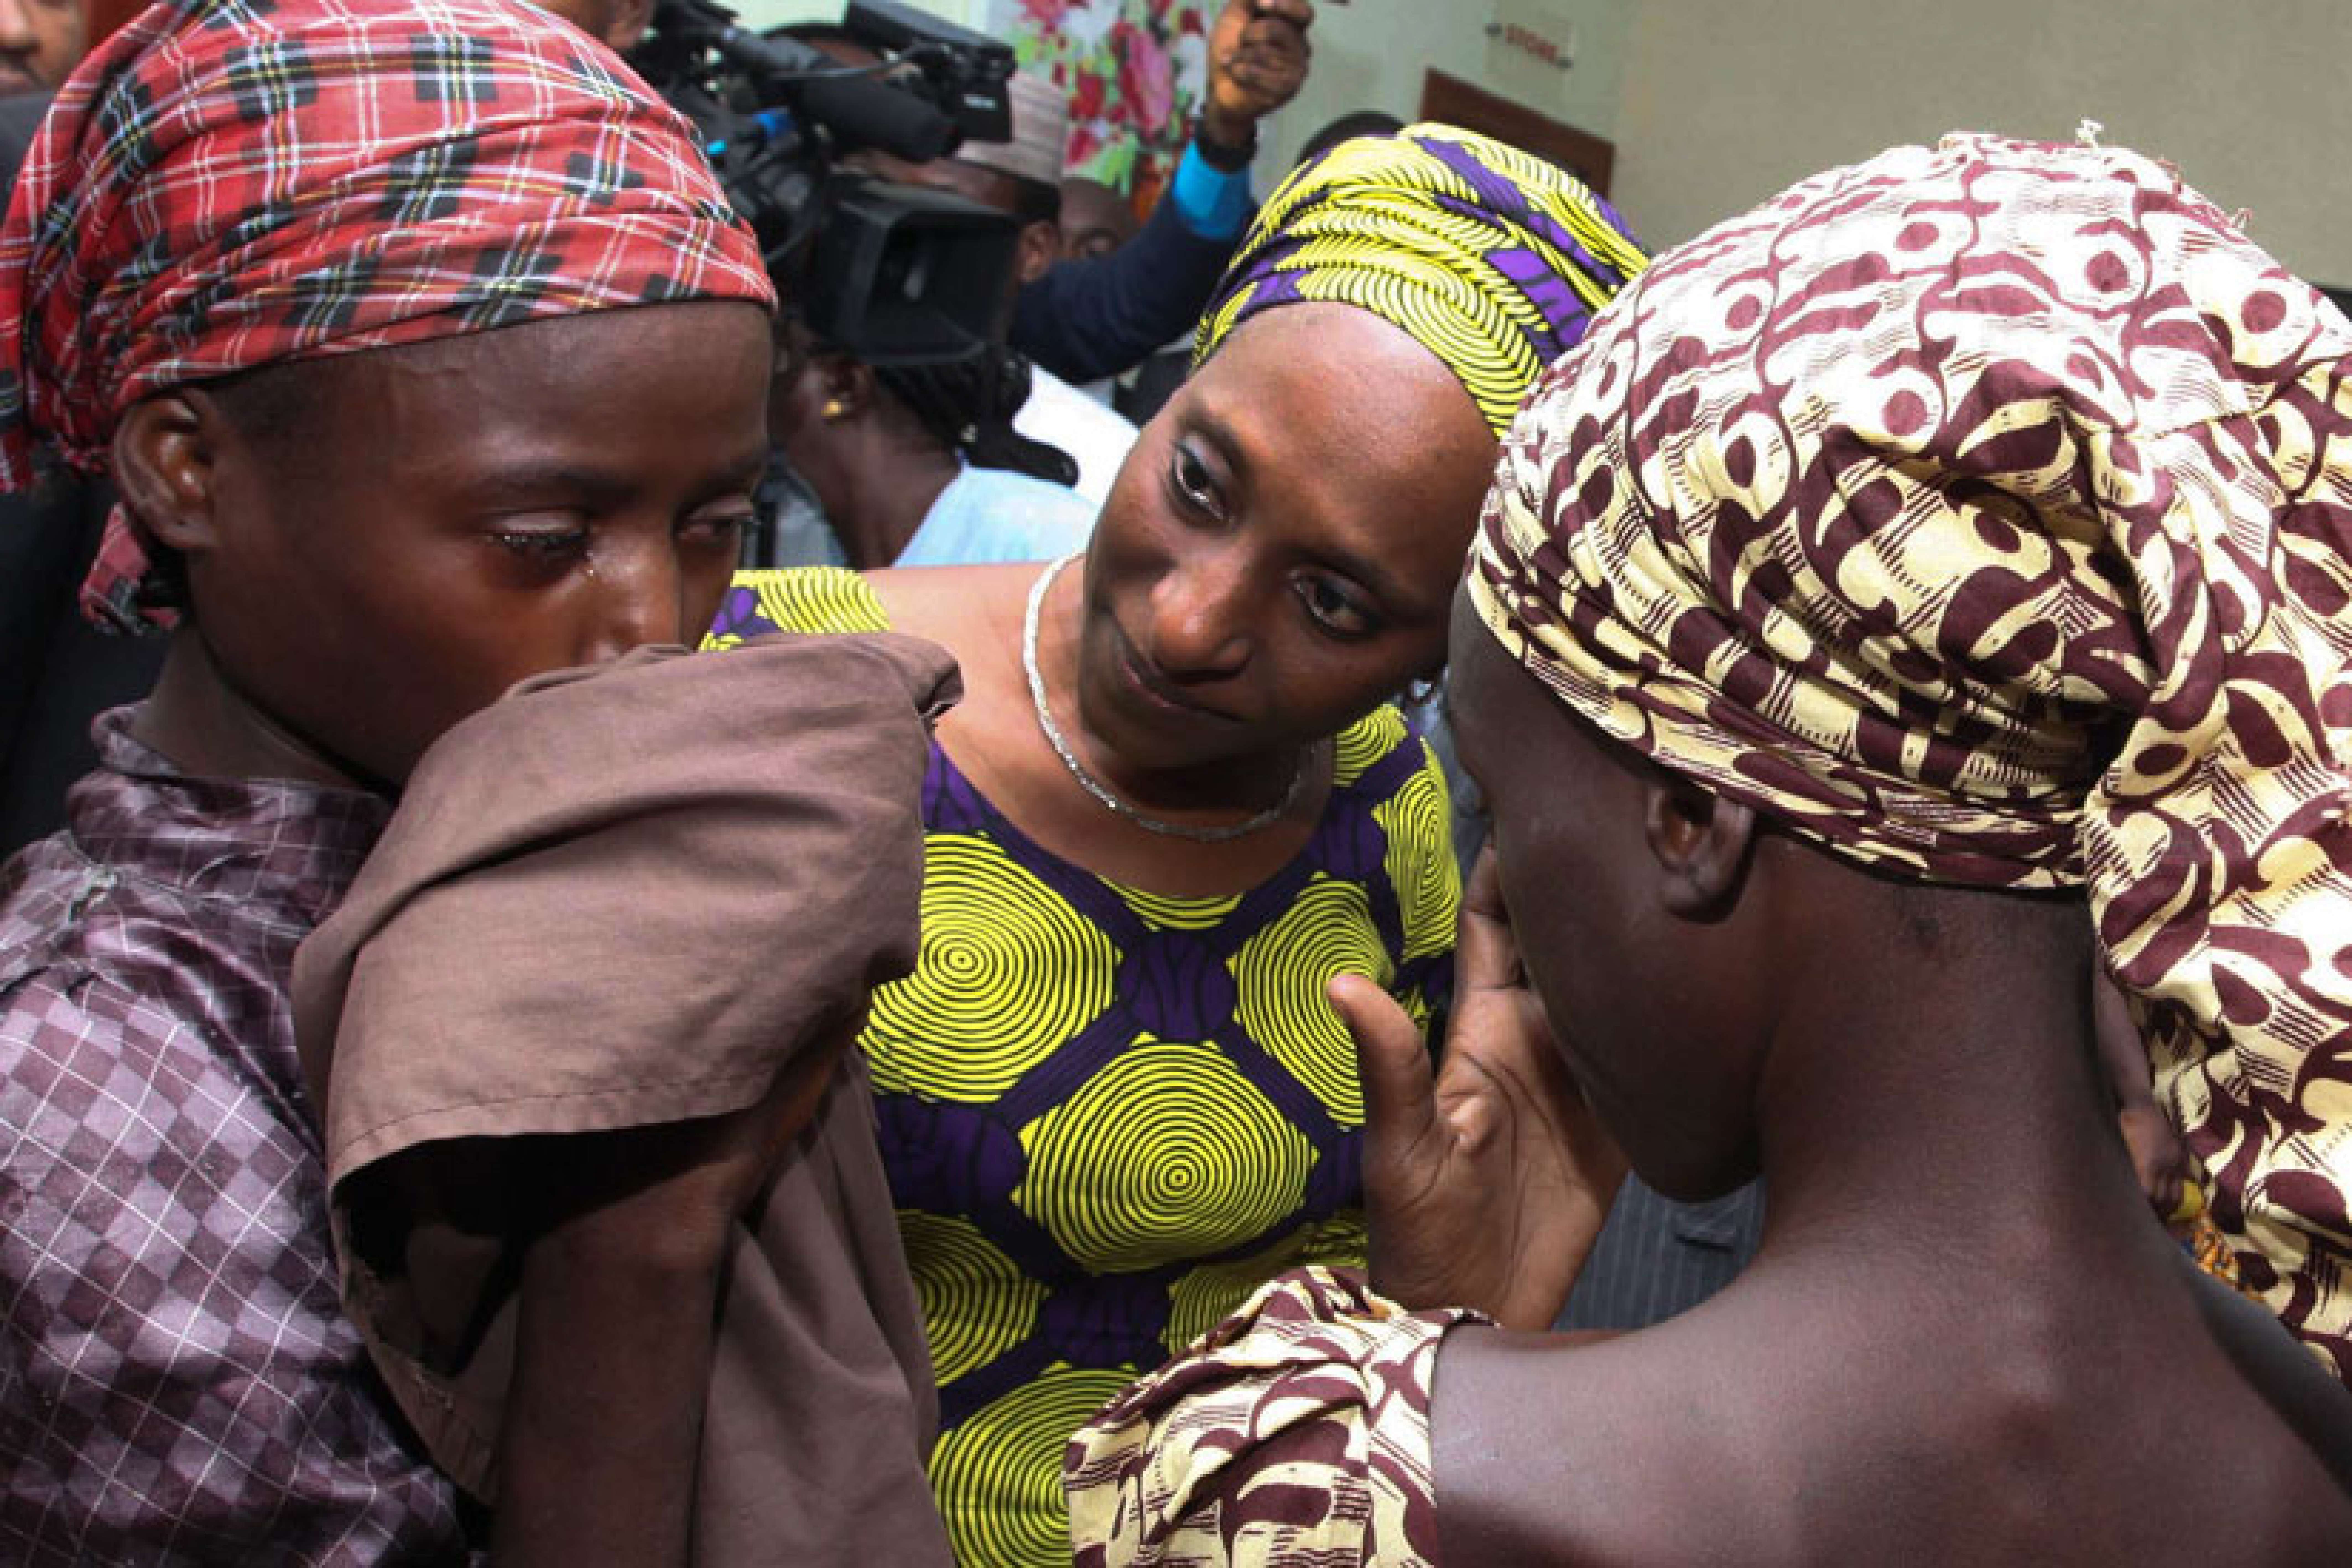 Oludolapo Osinbajo, wife of Nigerian Vice President Yemi Osinbajo, consoles one of the 21 released Chibok girls Oct. 13 in Abuja. Three Catholic leaders welcomed the release of some of the girls kidnapped in 2014 from a school in Chibok and urged the Nigerian government to prioritize the release of the remaining girls.